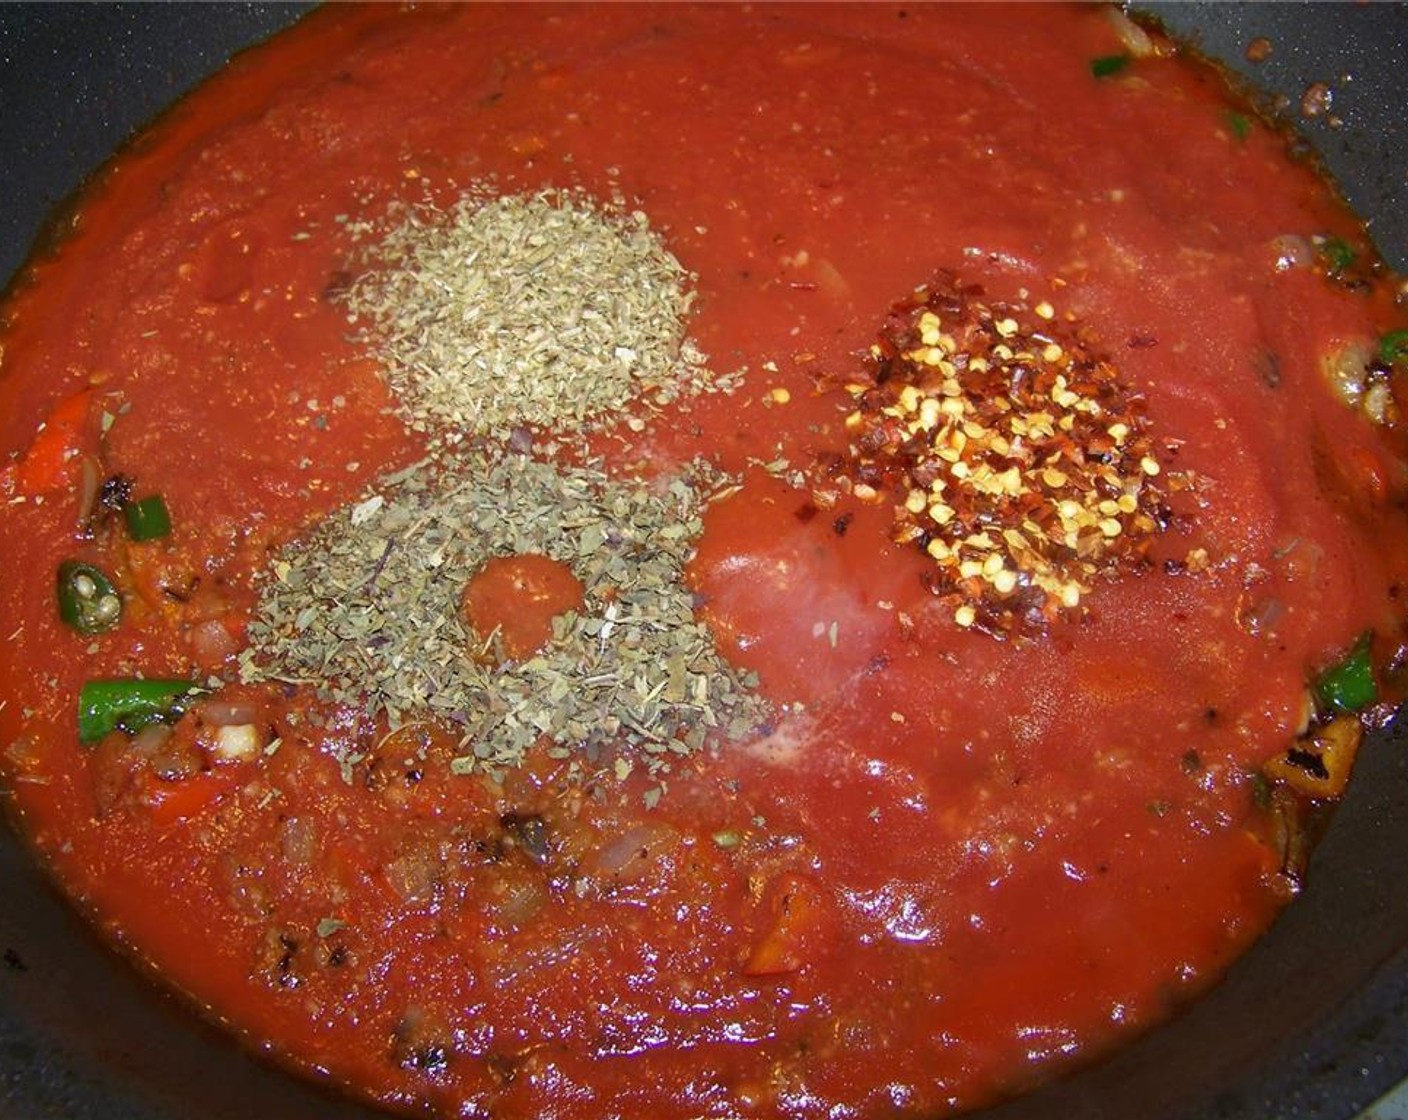 step 7 Then add the Crushed Red Pepper Flakes (to taste), Dried Basil (1 tsp), Dried Oregano (1 tsp), Canned Crushed Tomatoes (3 1/3 cups), and season with salt and pepper.